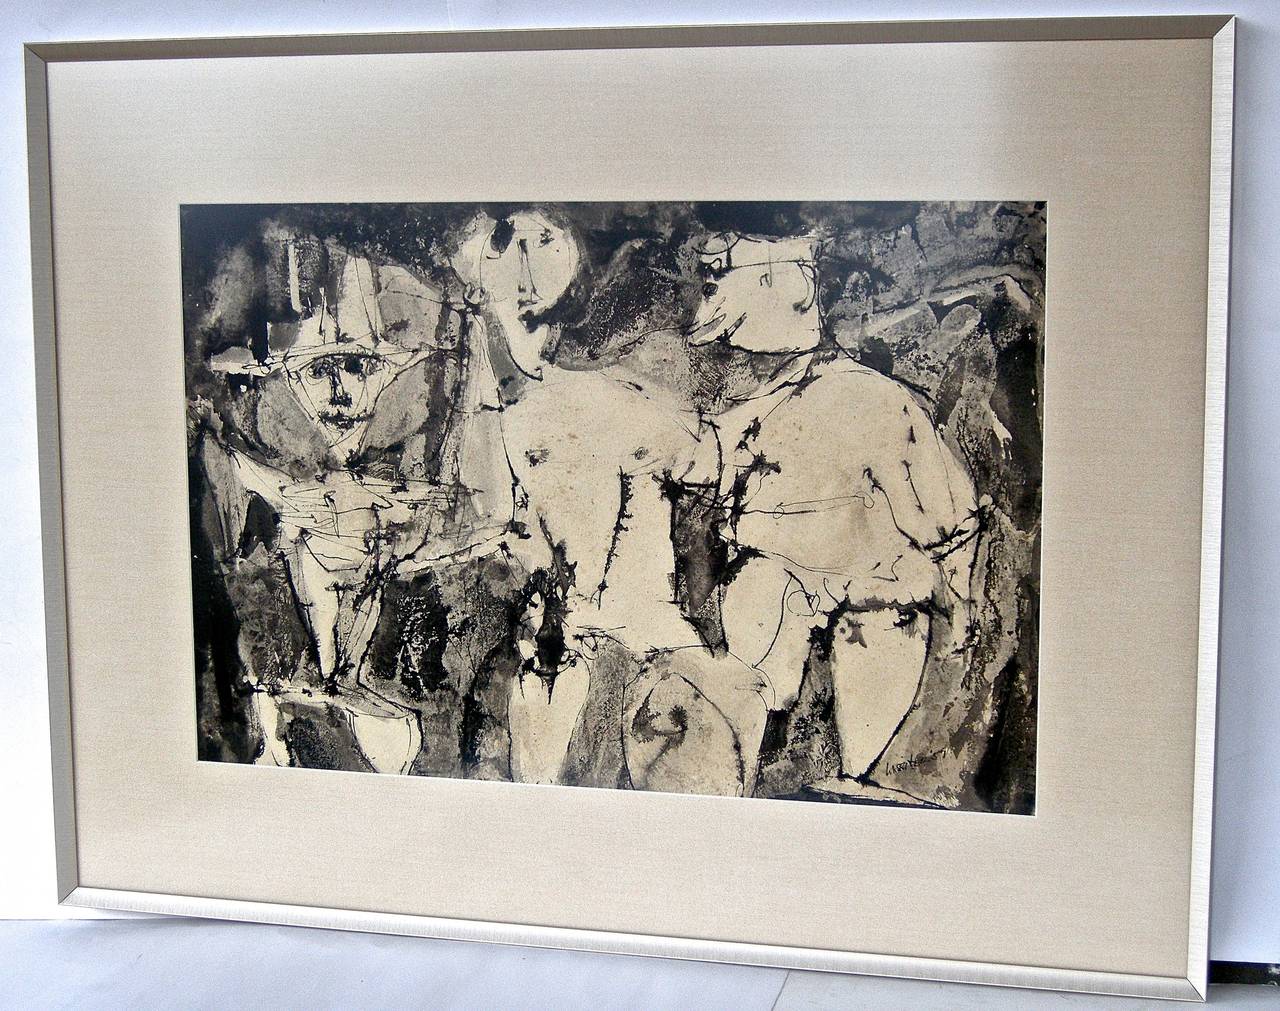 Striking, vintage ink and pen, gouache-style Modernist painting. Superb trio of motley, free-form figures of dubious endeavors. A vivid and evocative standout.
Artist signed and dated. Contemporary custom framing.